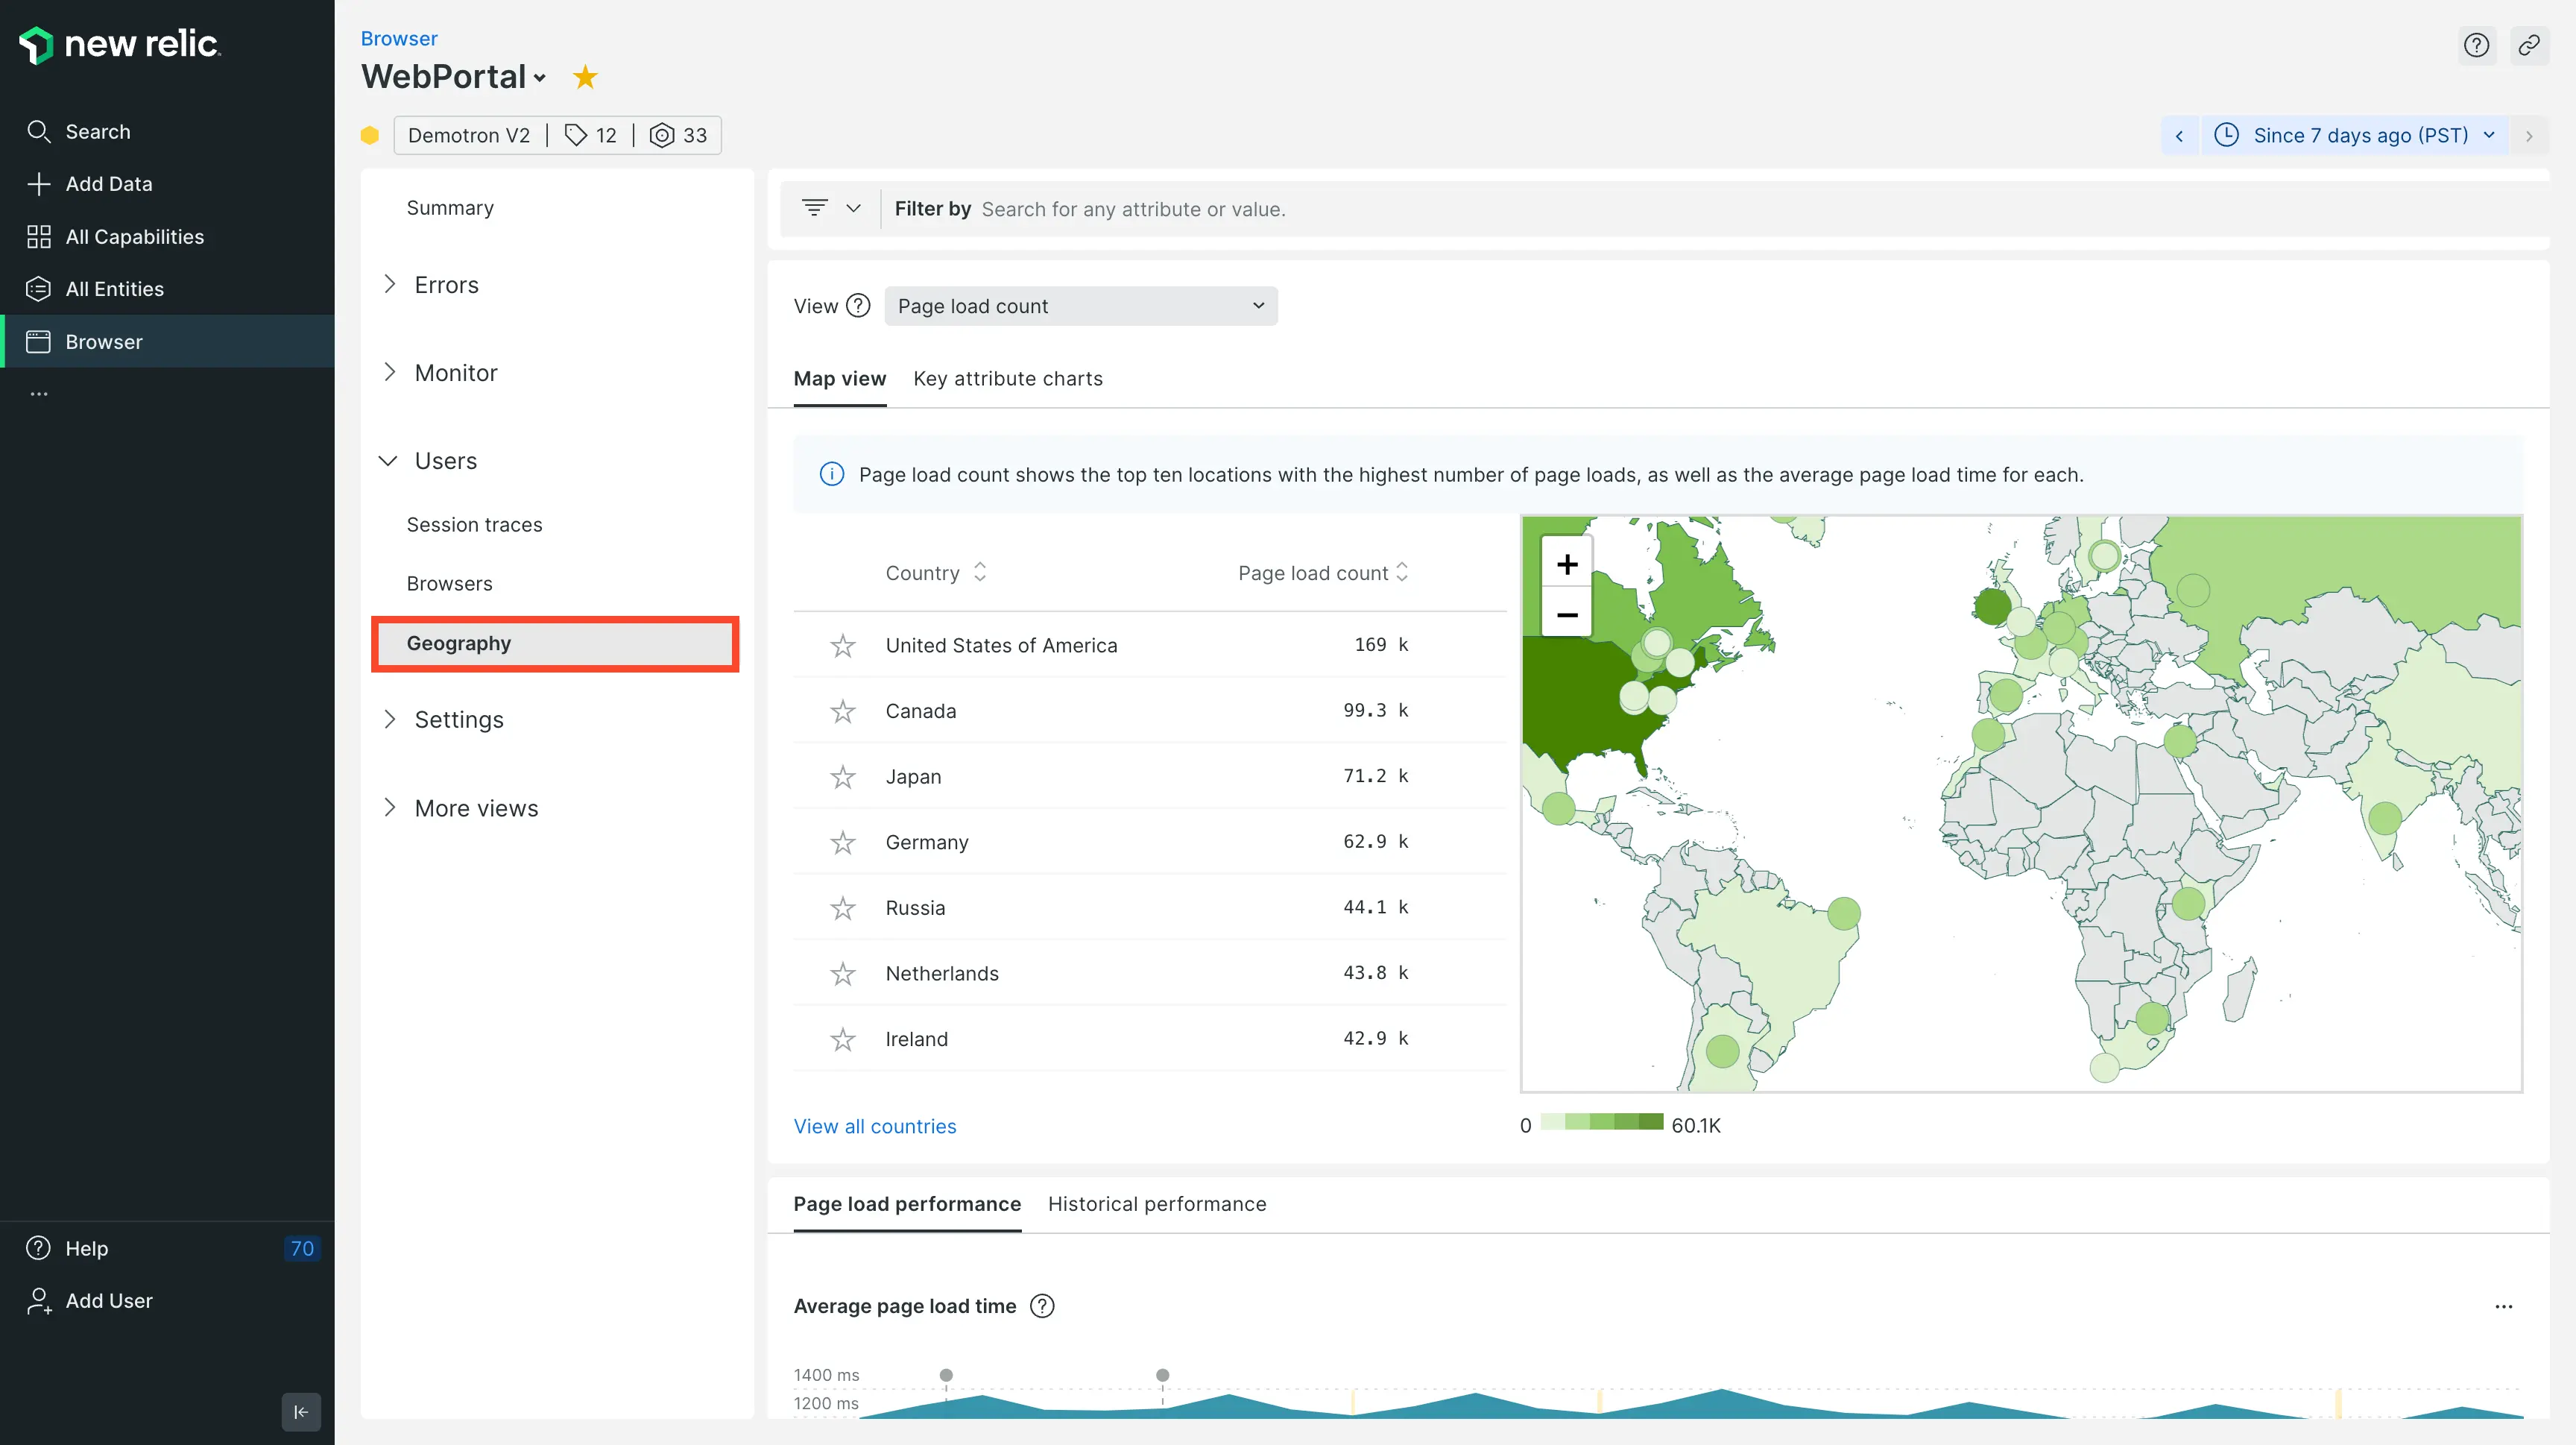 Screenshot of Geography UI in New Relic